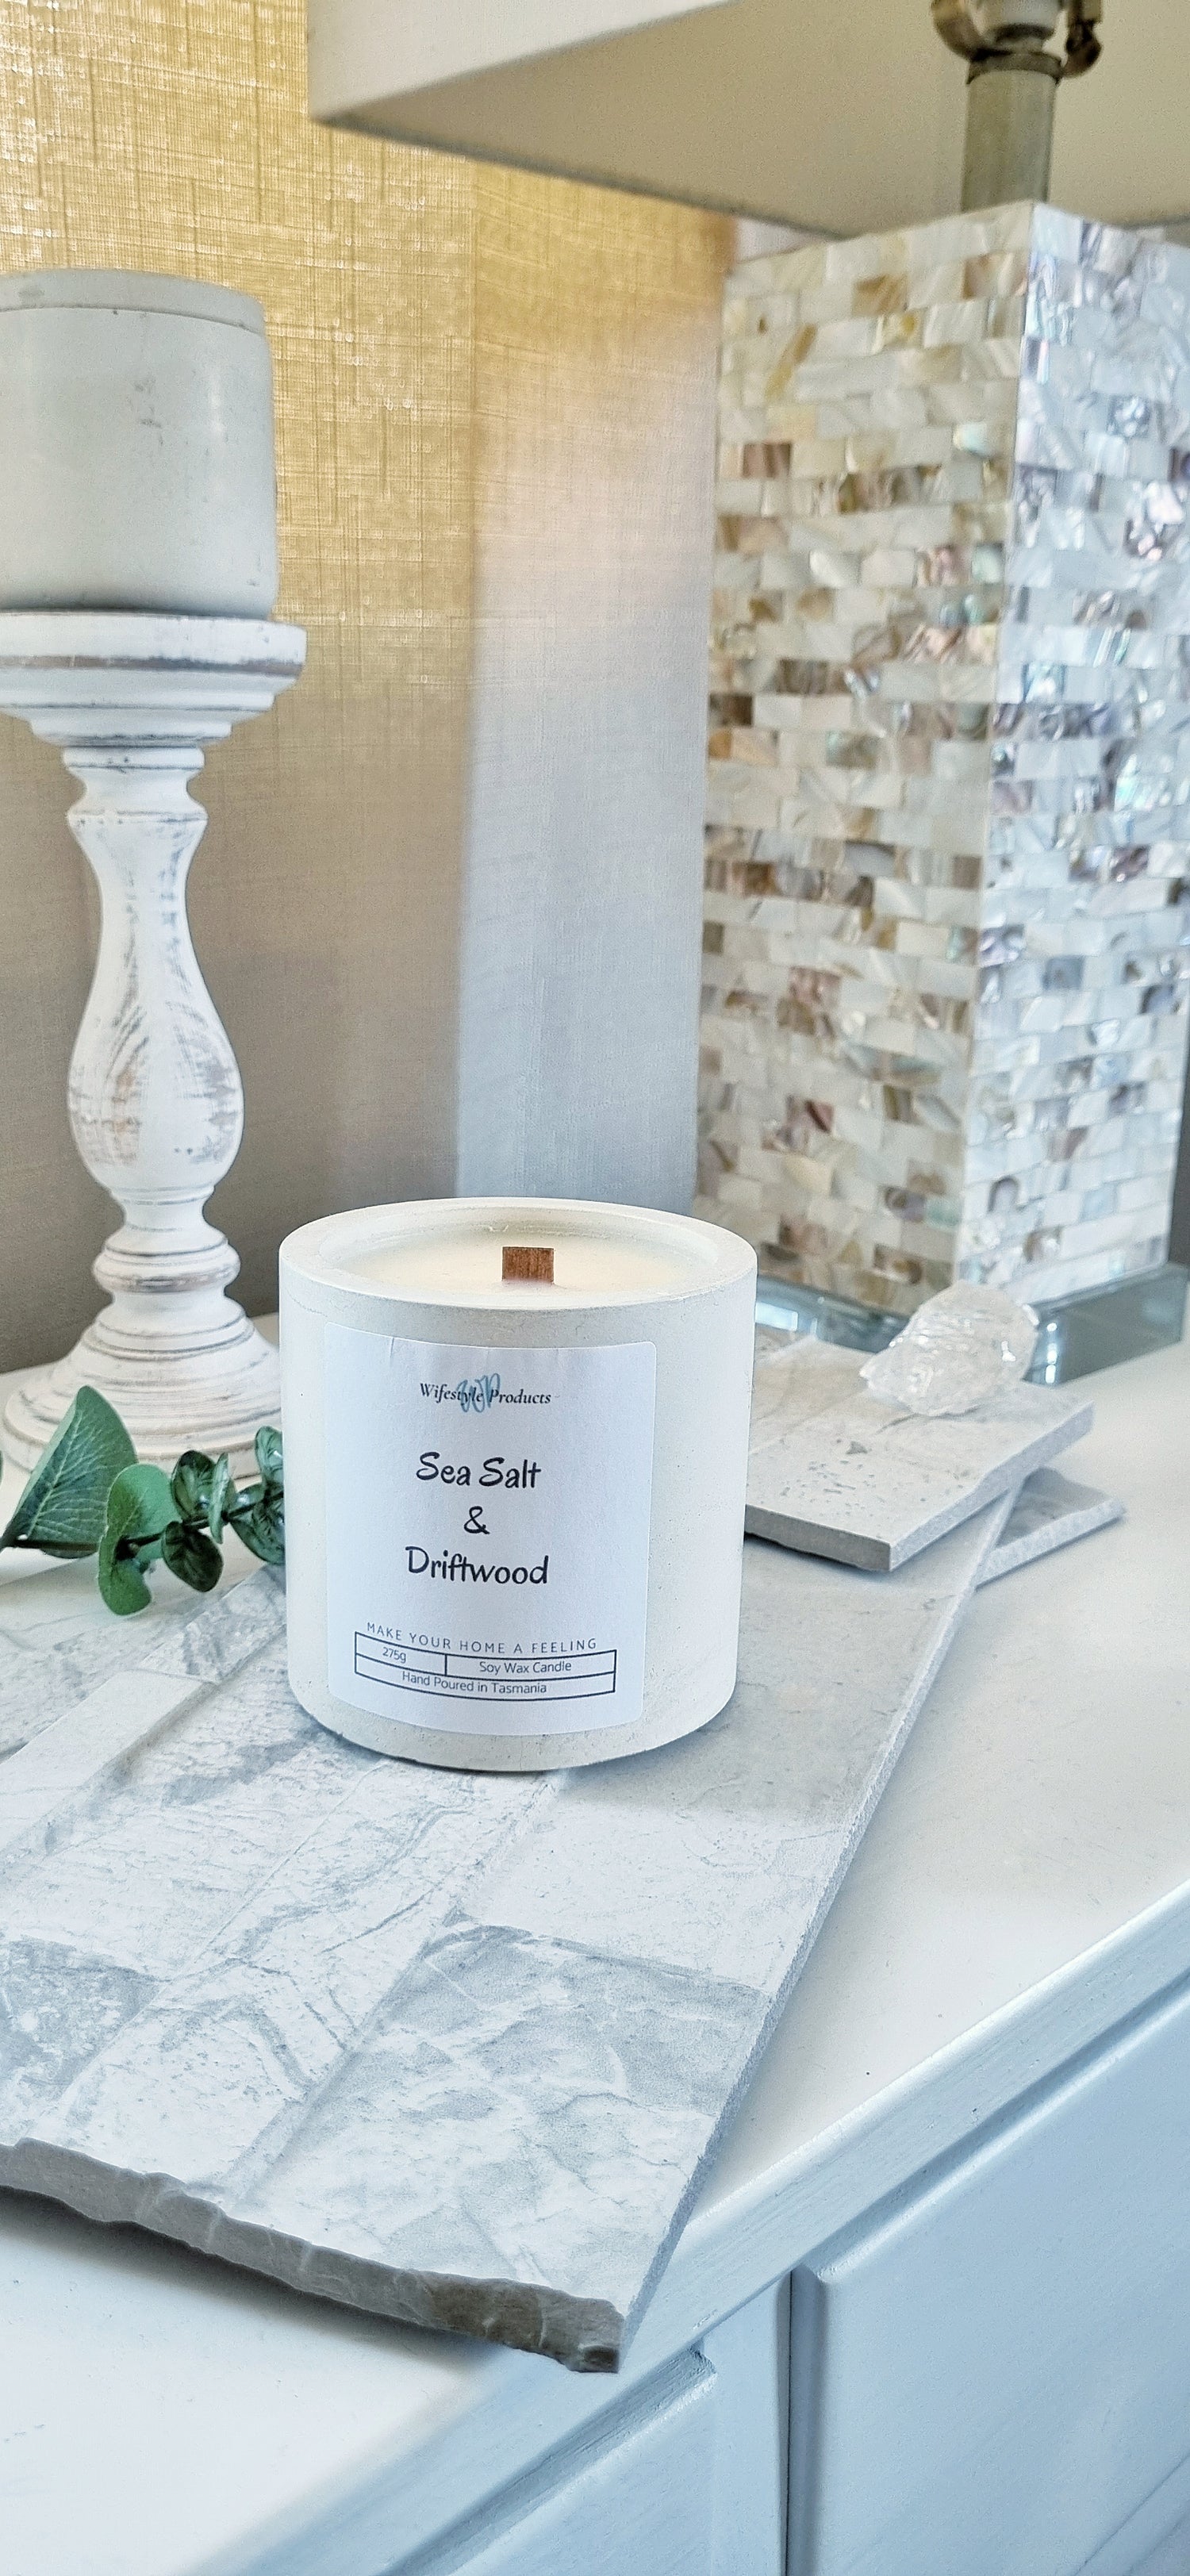 Candles & Melts - Wifestyle Products